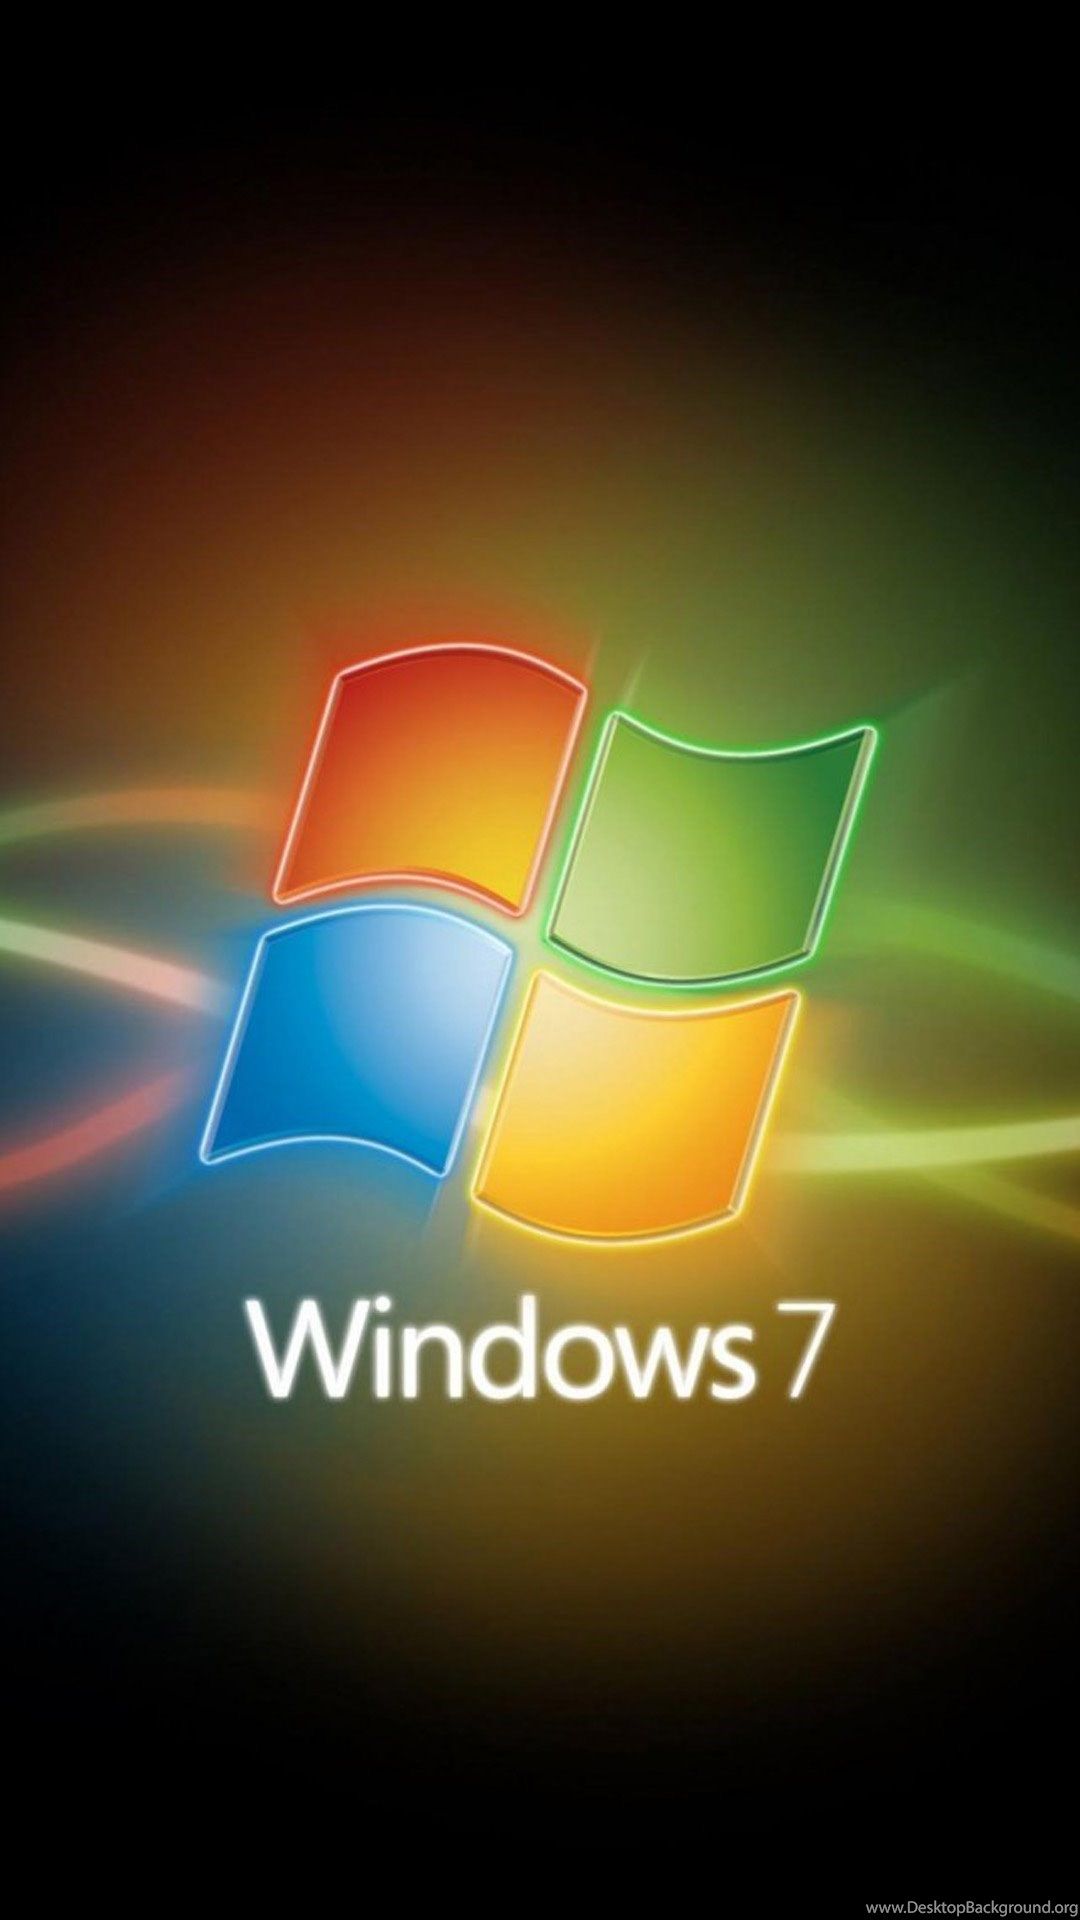 Android Logo Windows 7 Hd Wallpapers Wallpaper Cave